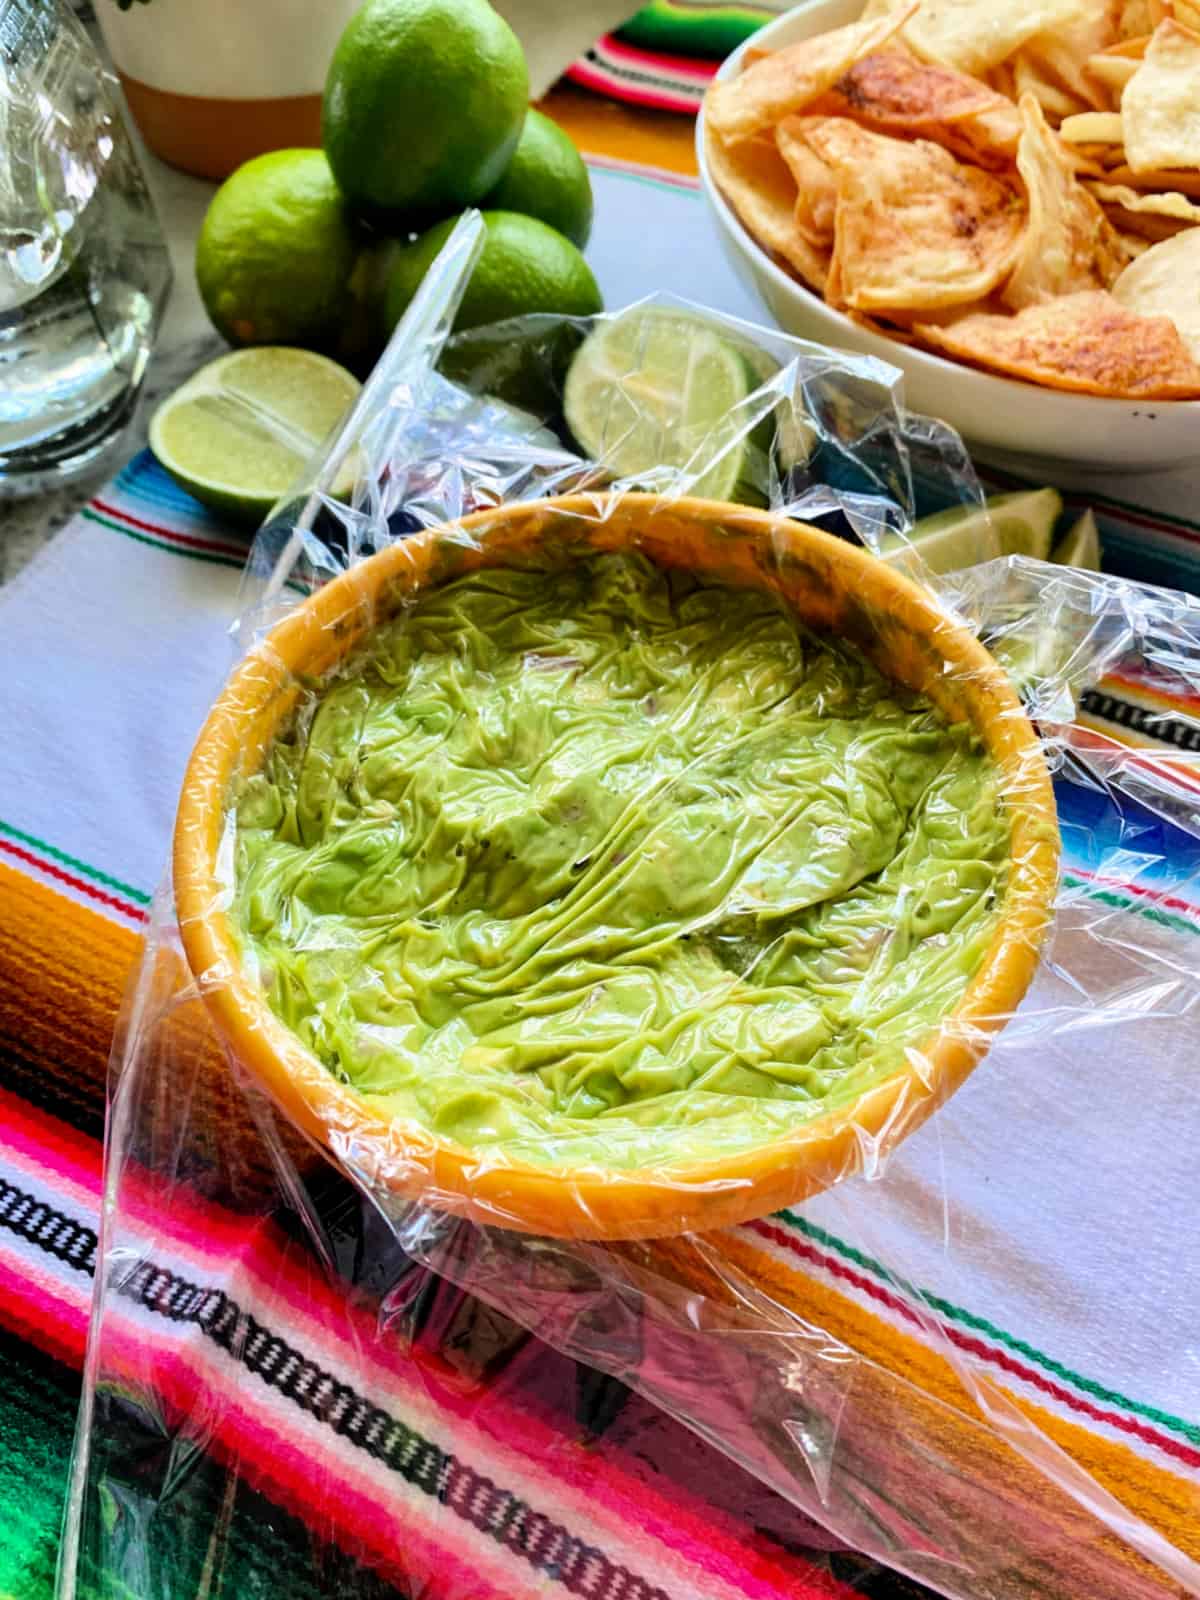 Yellow bowl filled with guacamole and plastic wrap.  